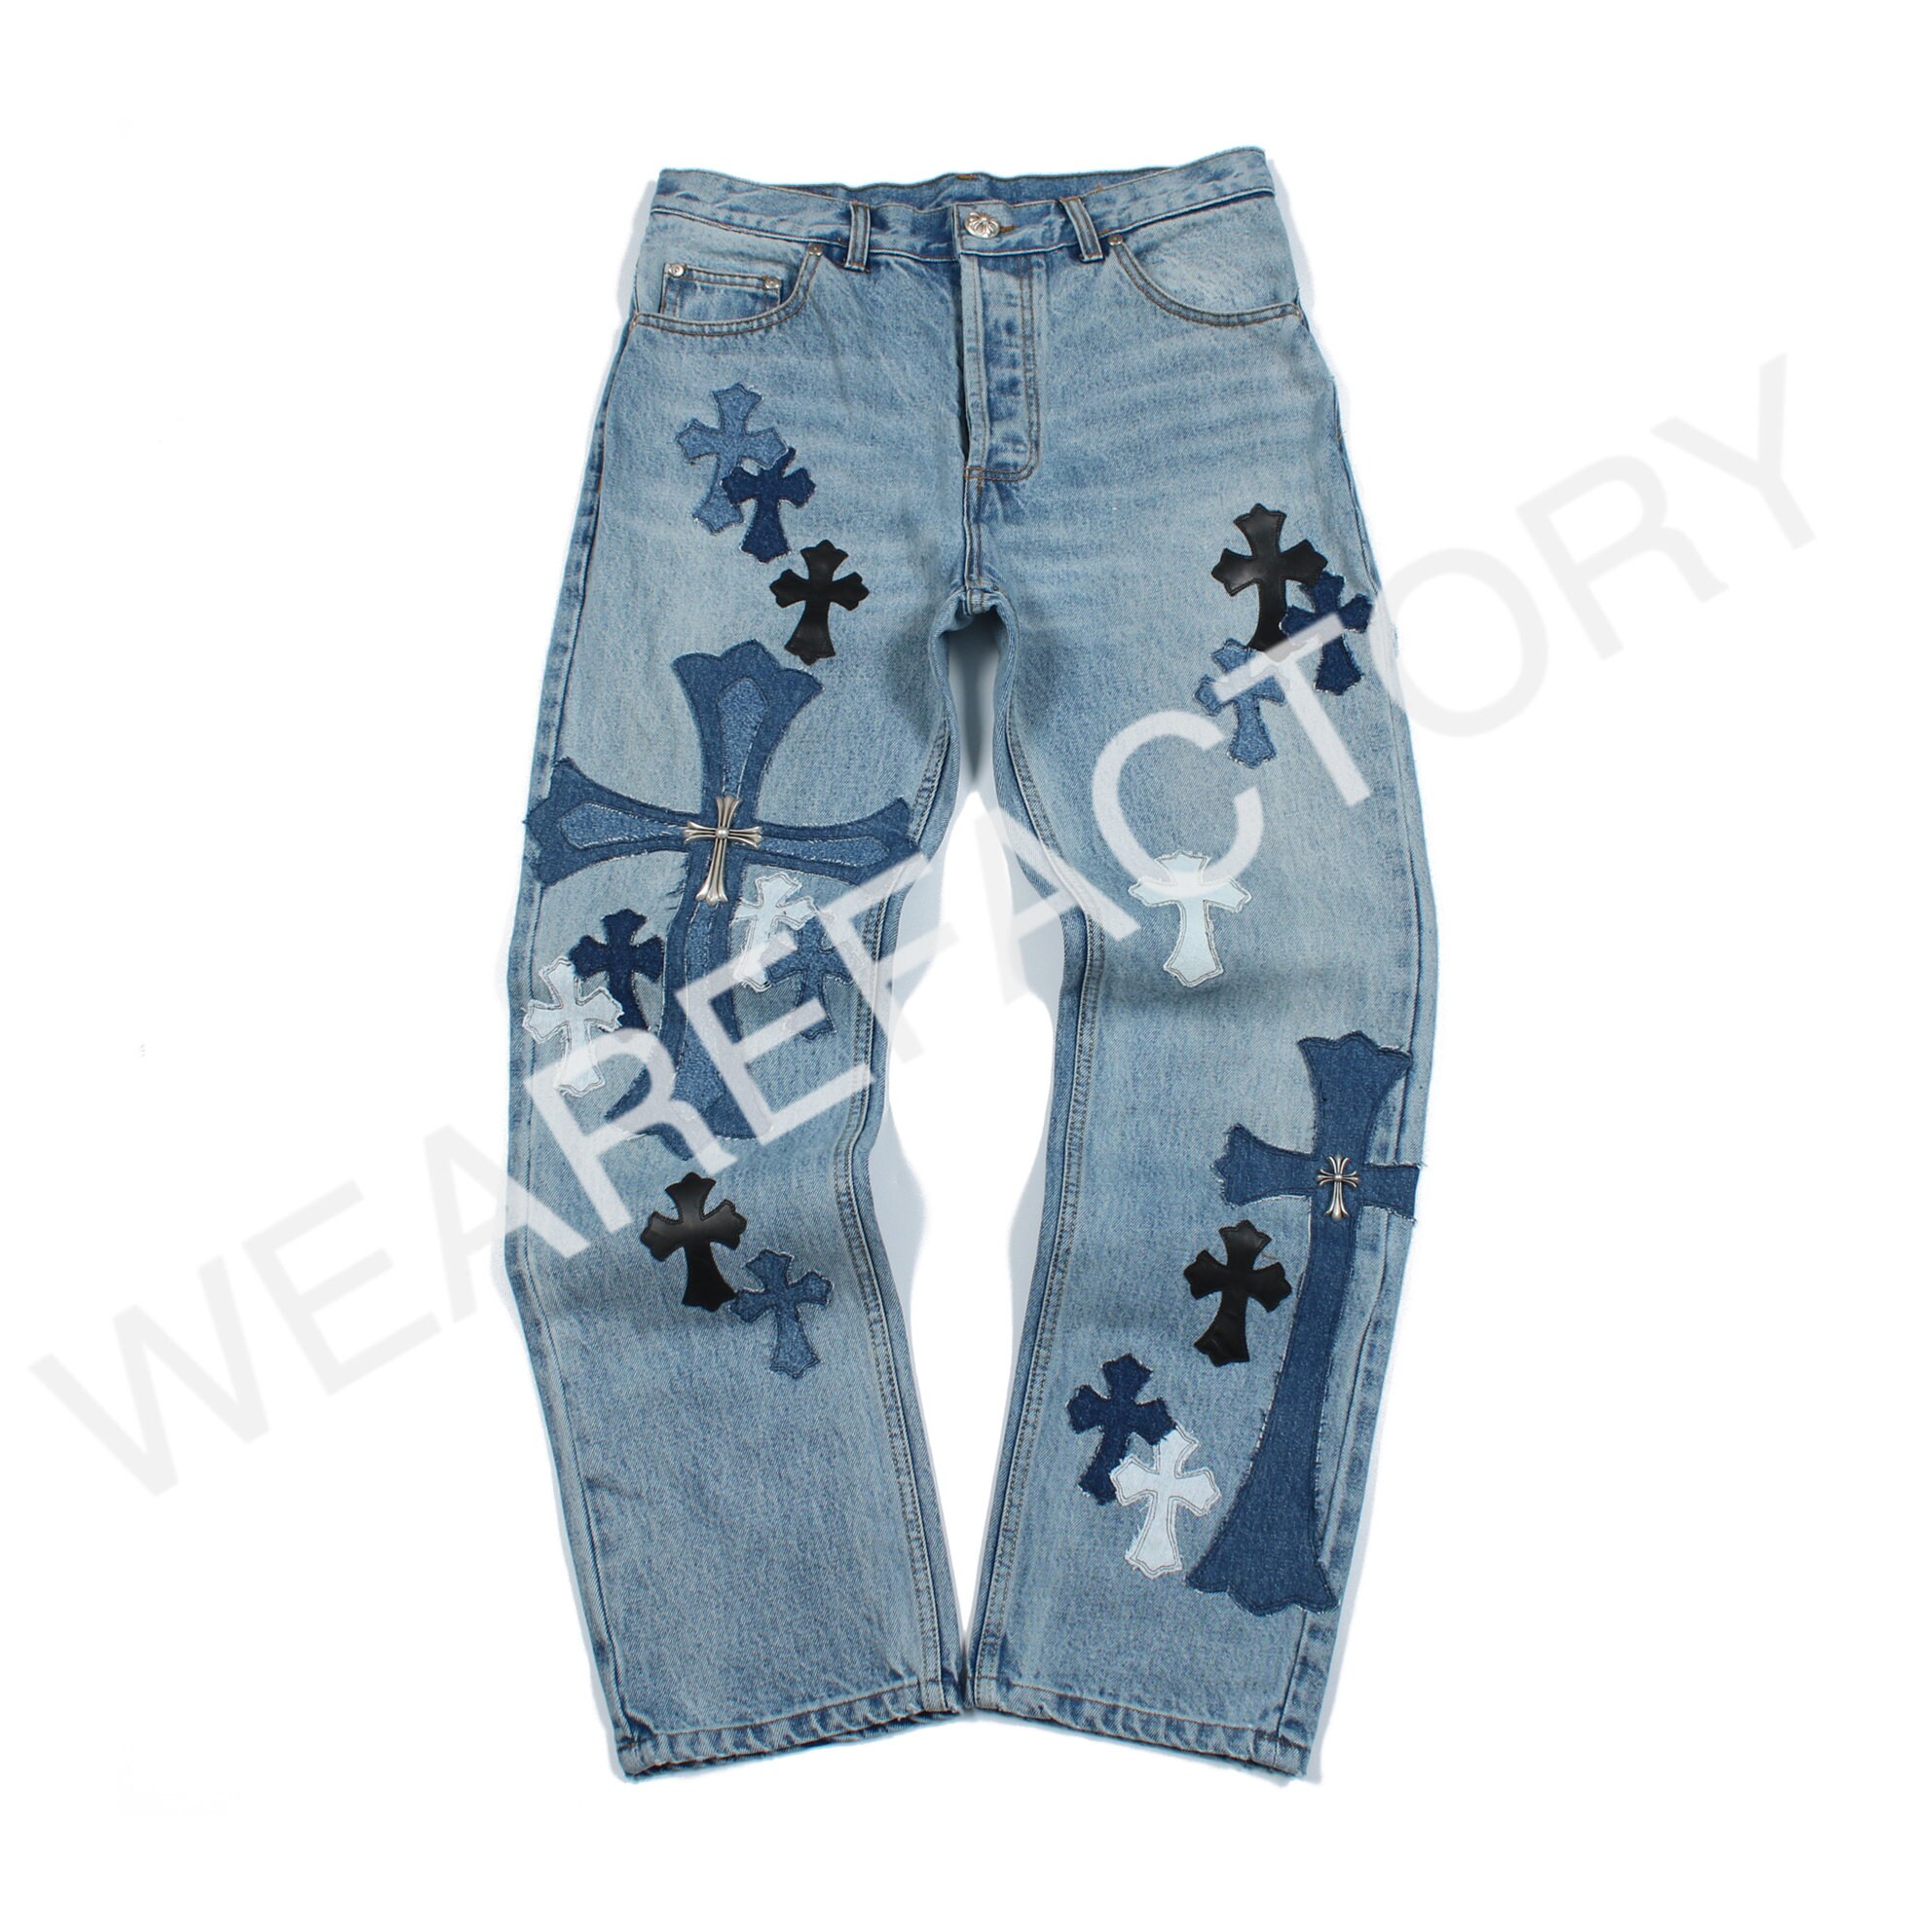 Chrome Hearts cross patched jeans red & black crosses SZ:W30